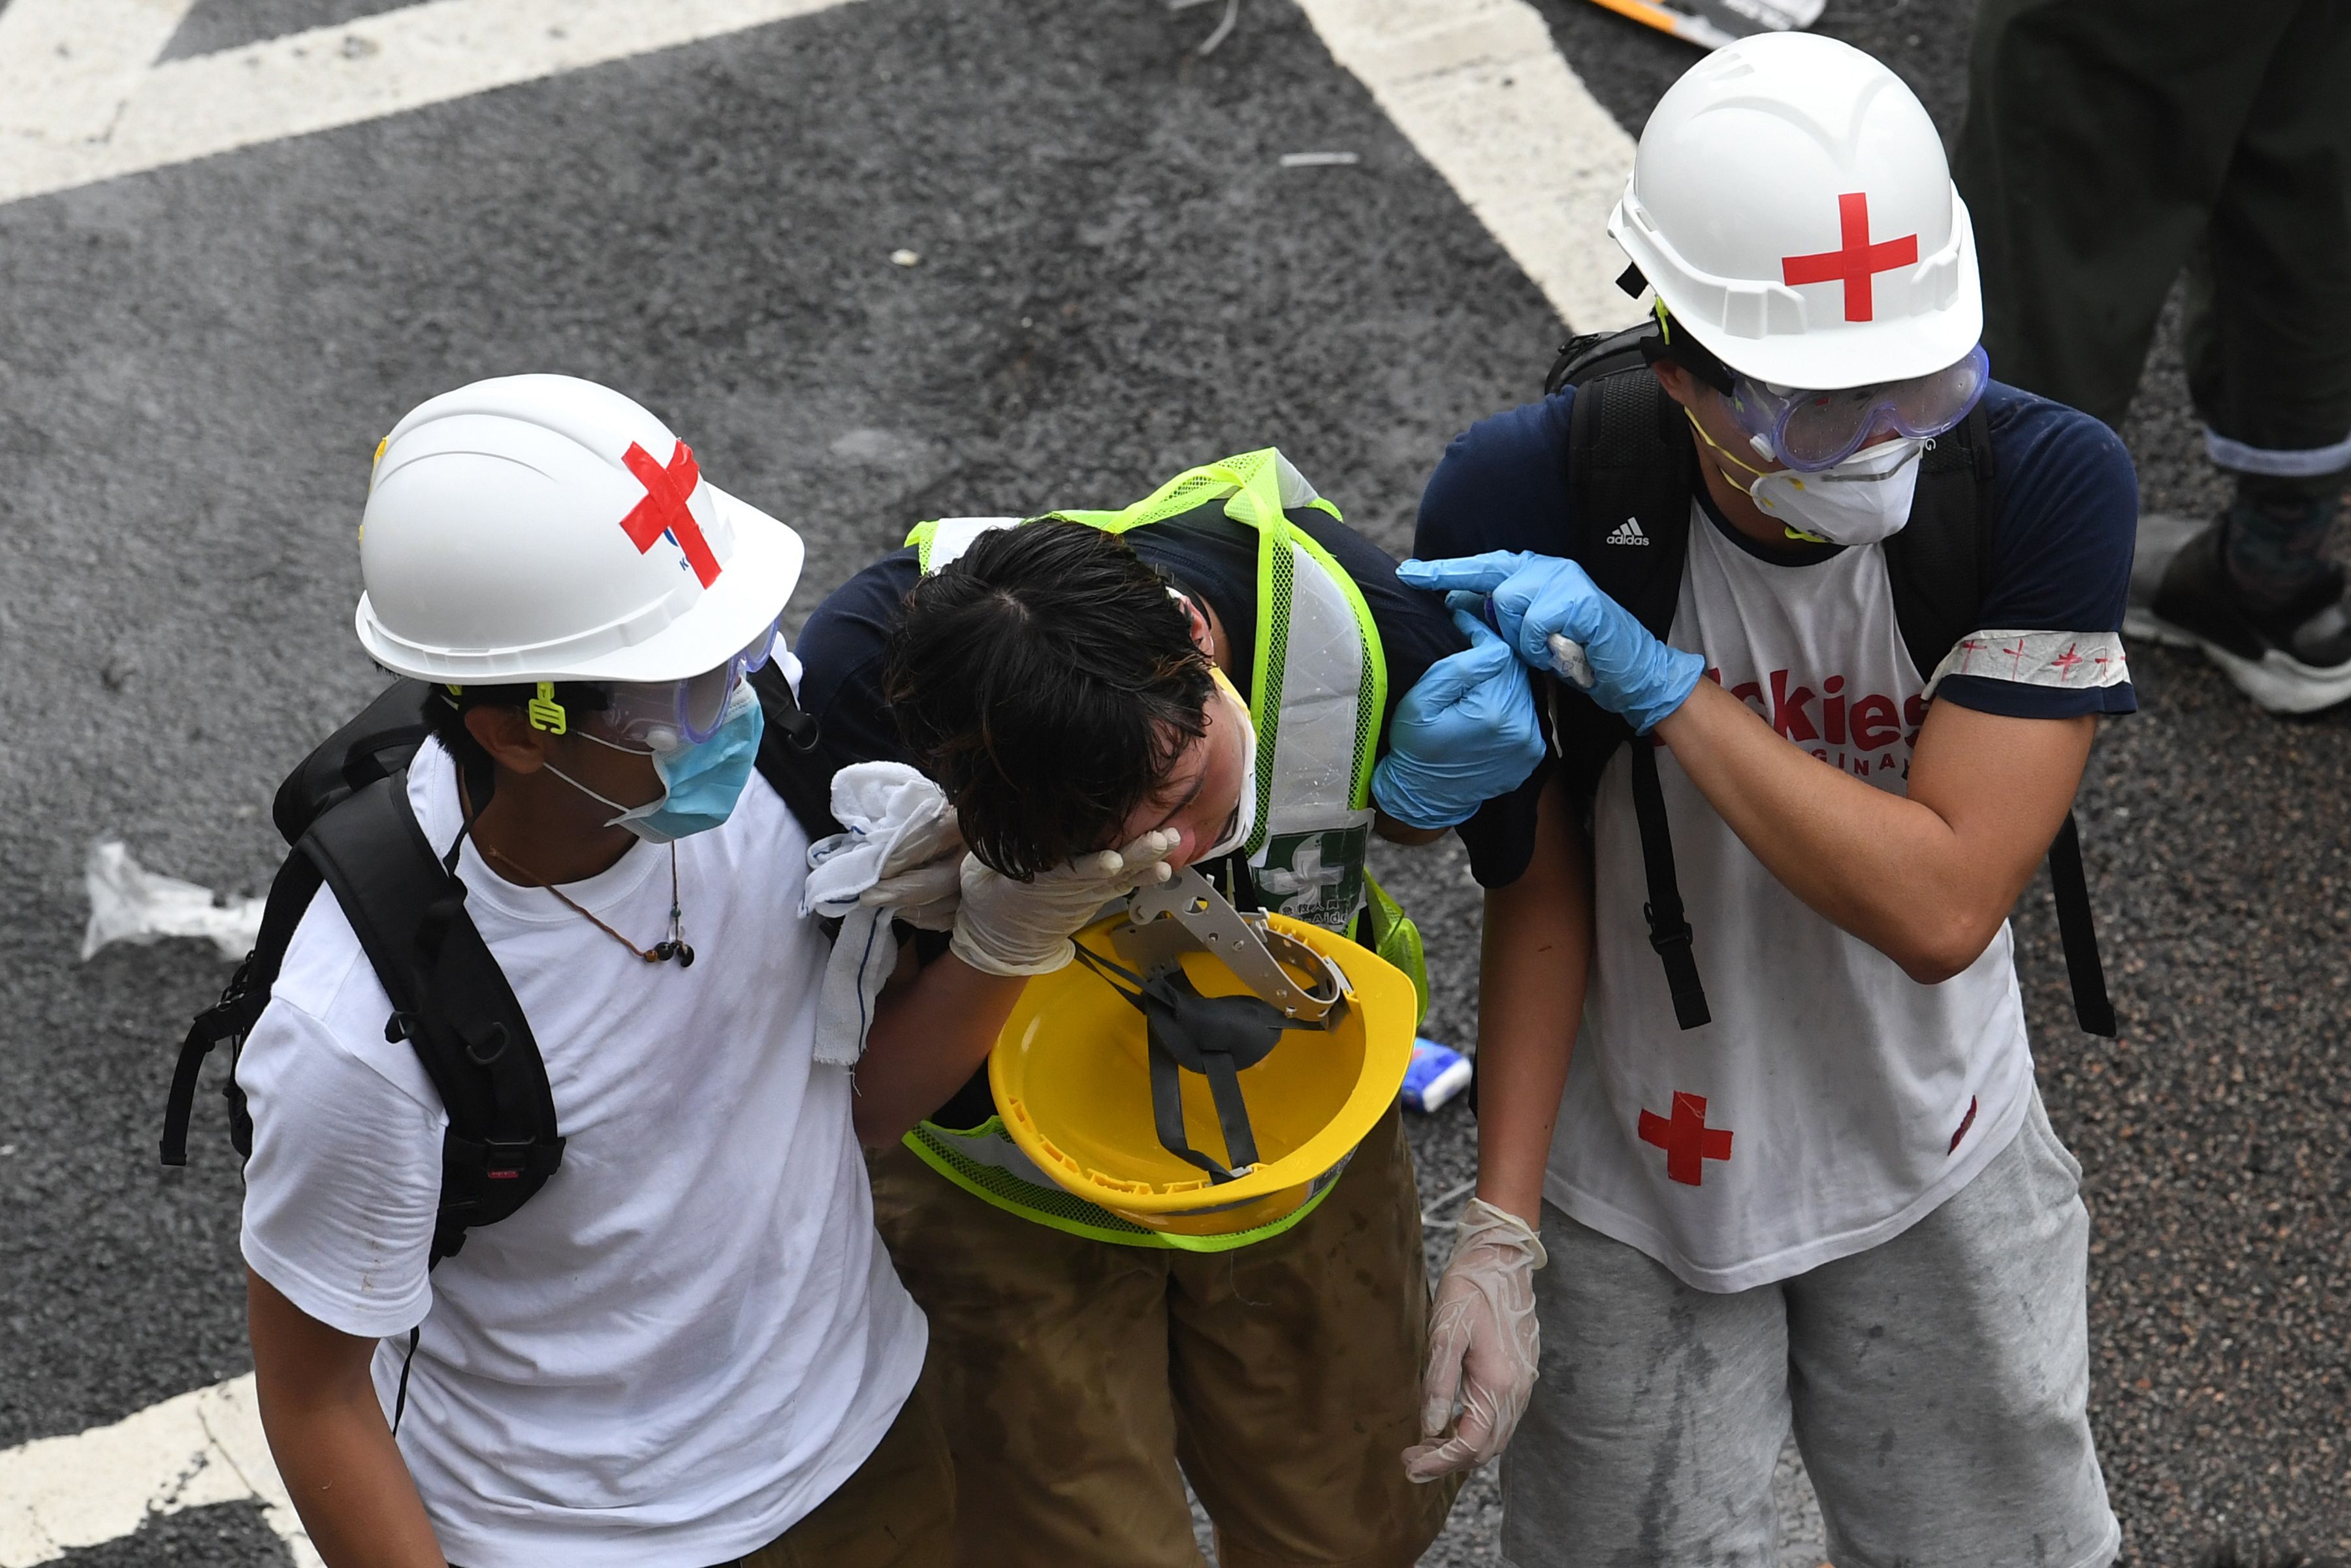 A protester is helped by medical volunteers after being hit by tear gas fired by the police during a rally against a controversial extradition law proposal in Hong Kong on June 12, 2019.